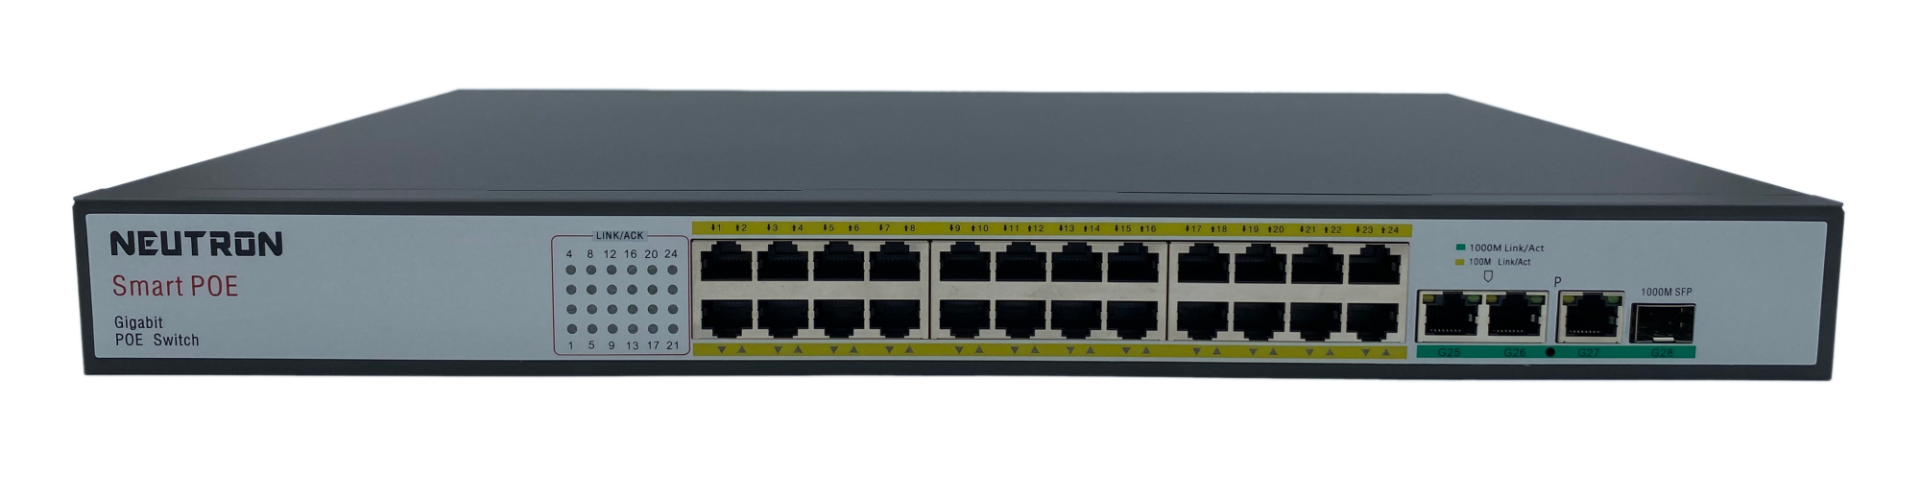 NT-PS24-320 24 PORT POE SWITCH